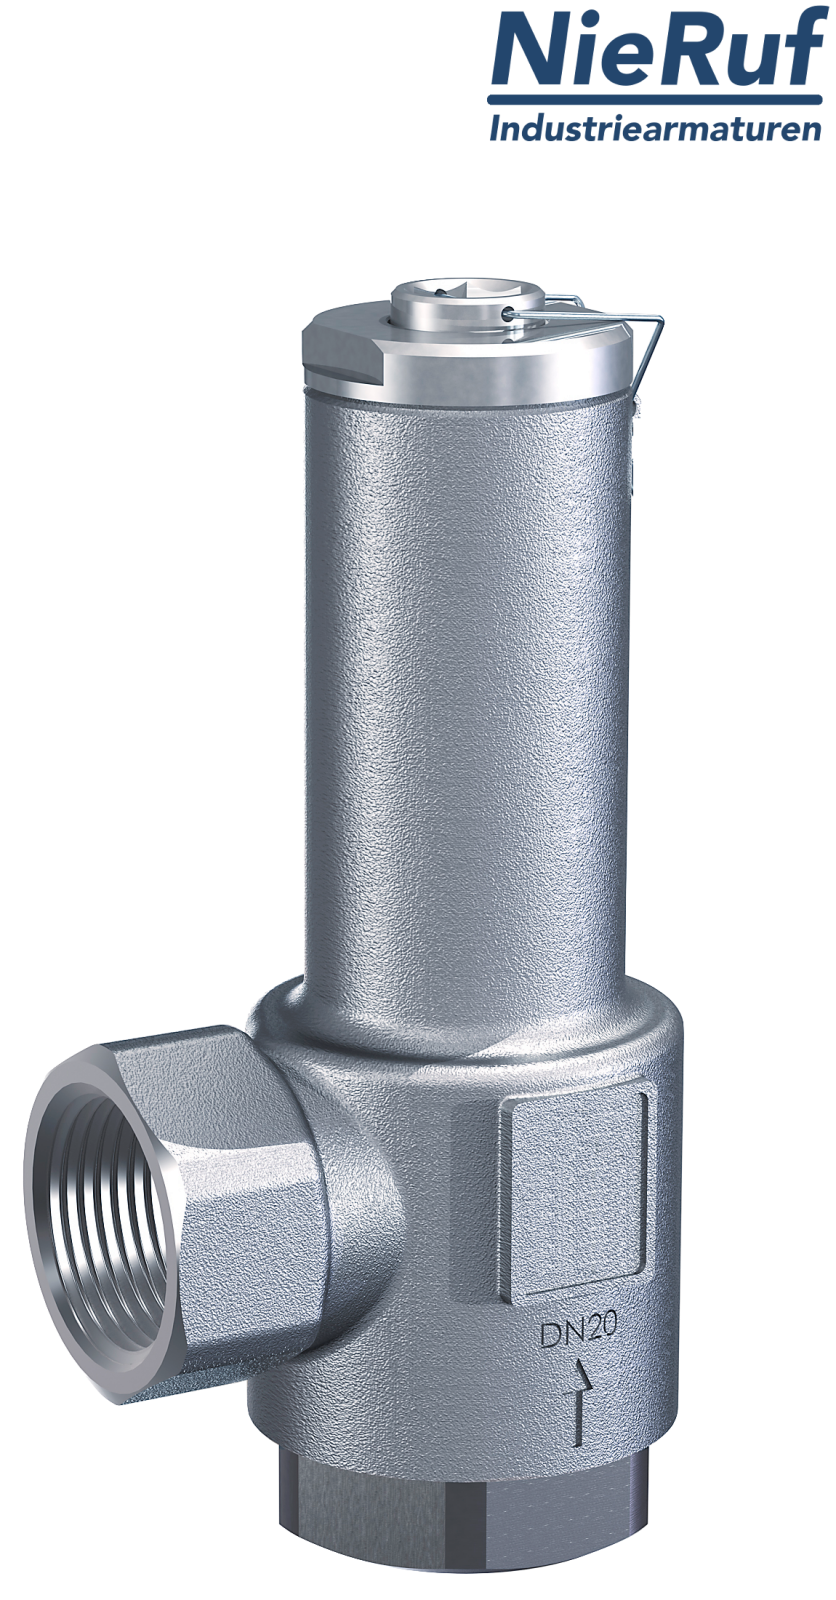 angle-type overflow valve 1 1/4" inch fm UV03 stainless steel AISI 316L 0,5 - 2,5 bar